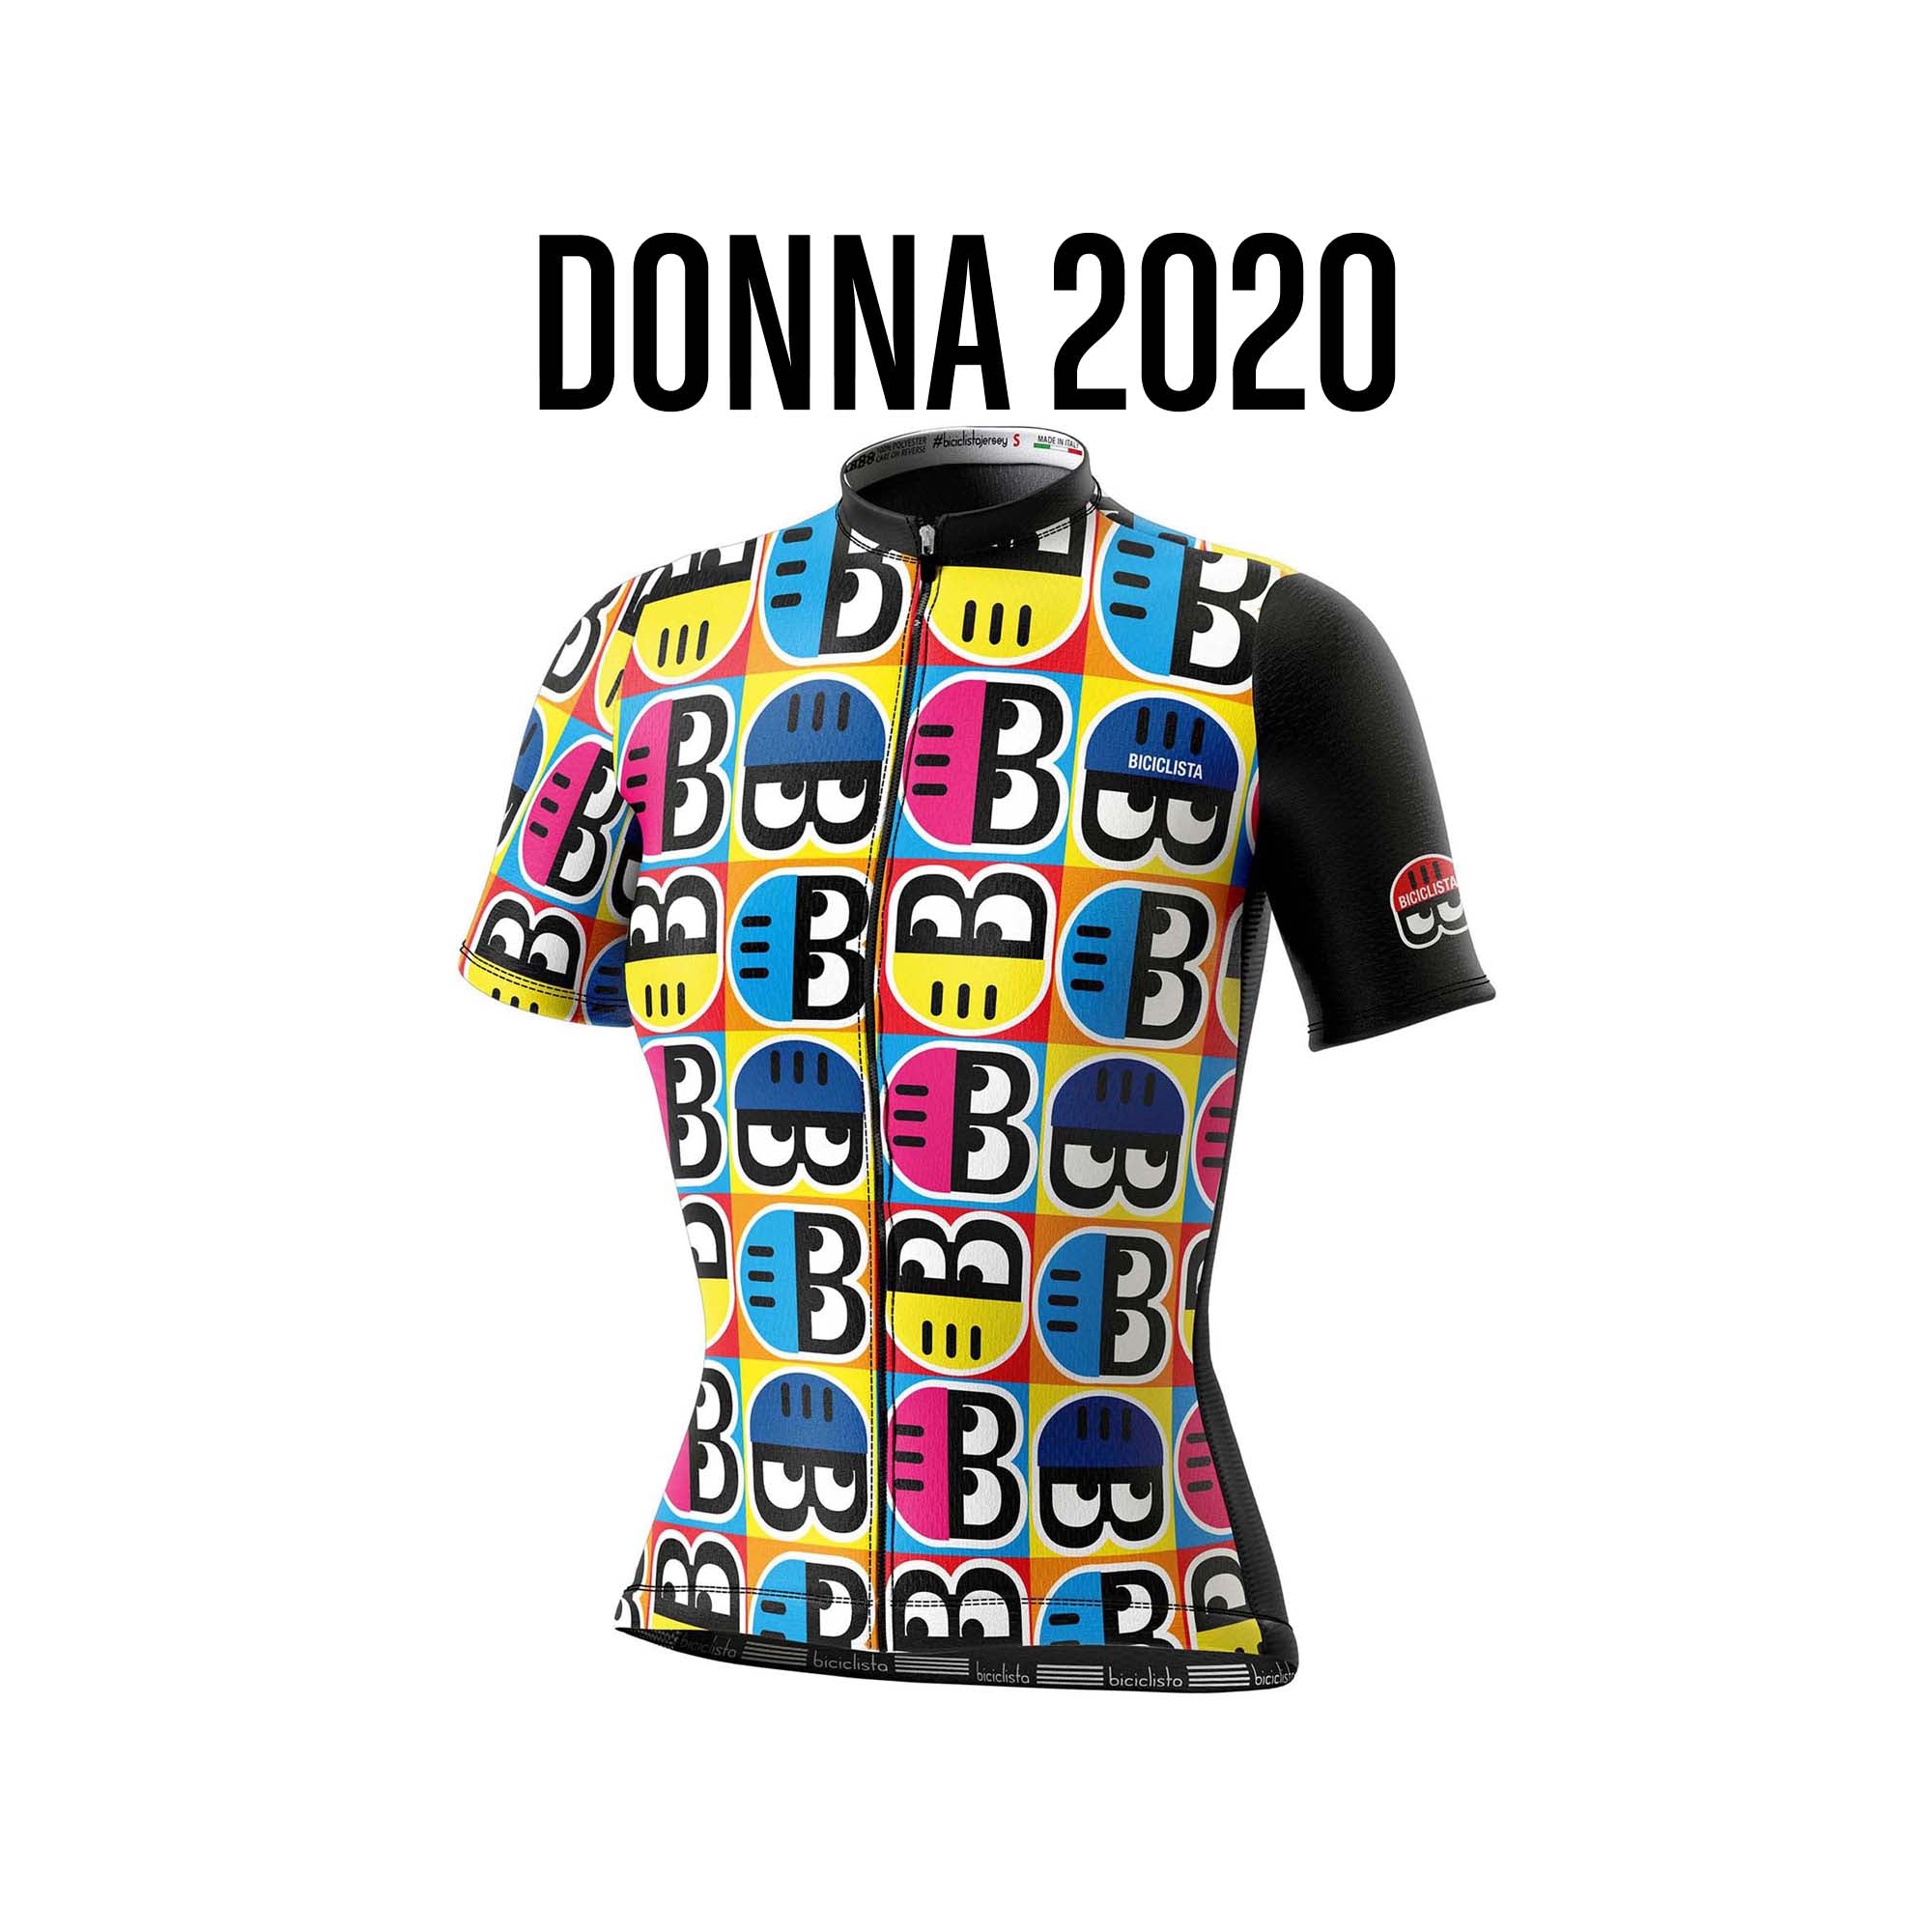 New for Donna